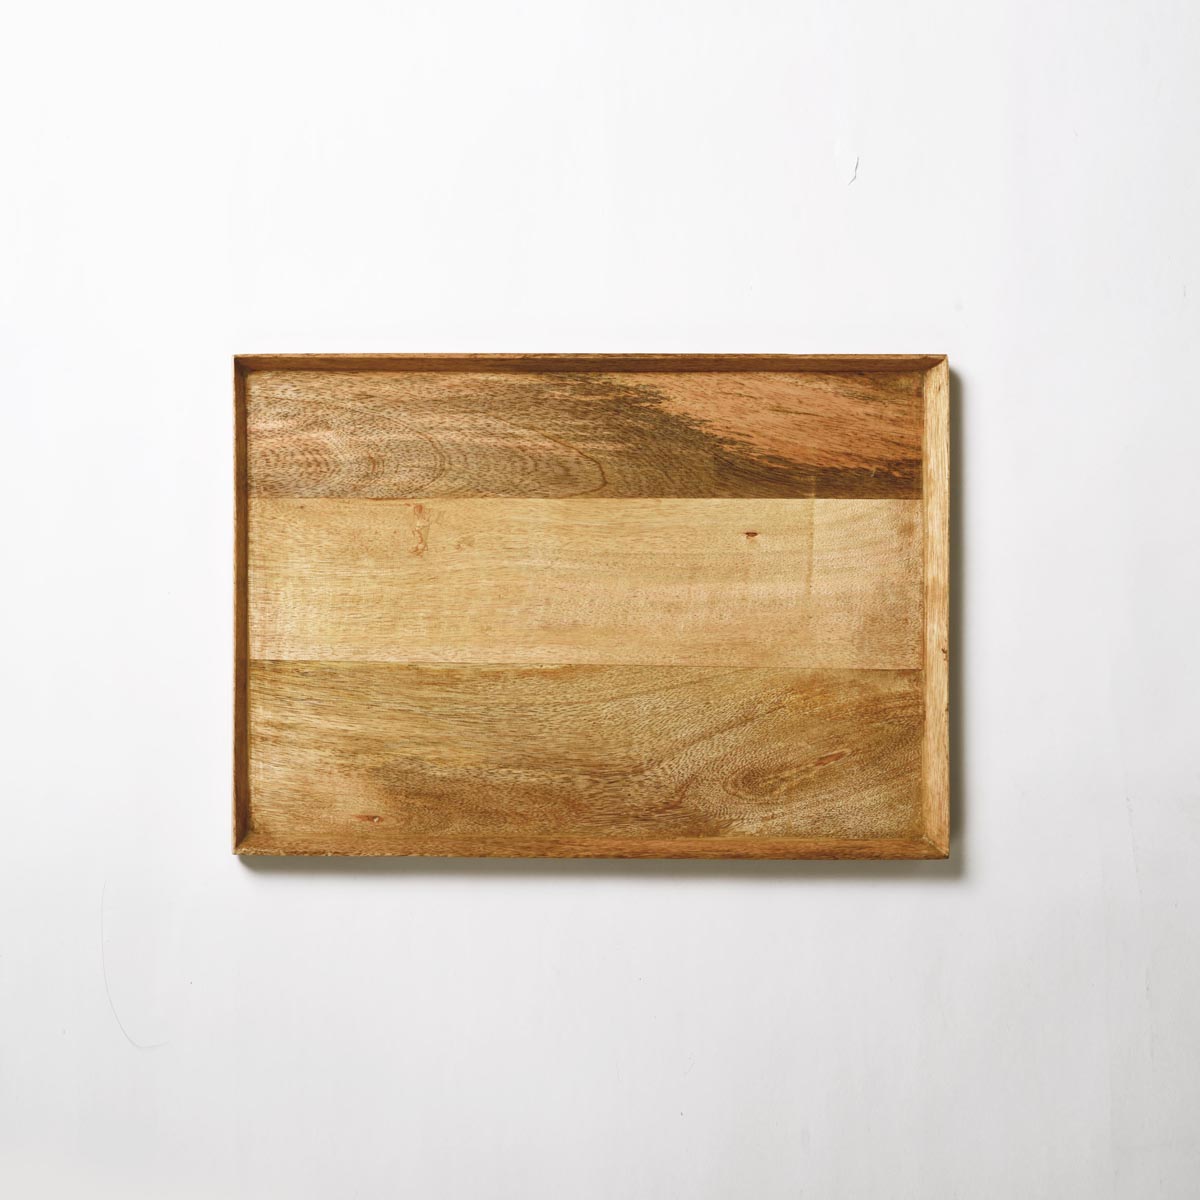 Large rustic mango wood tray - size 10X15 inches